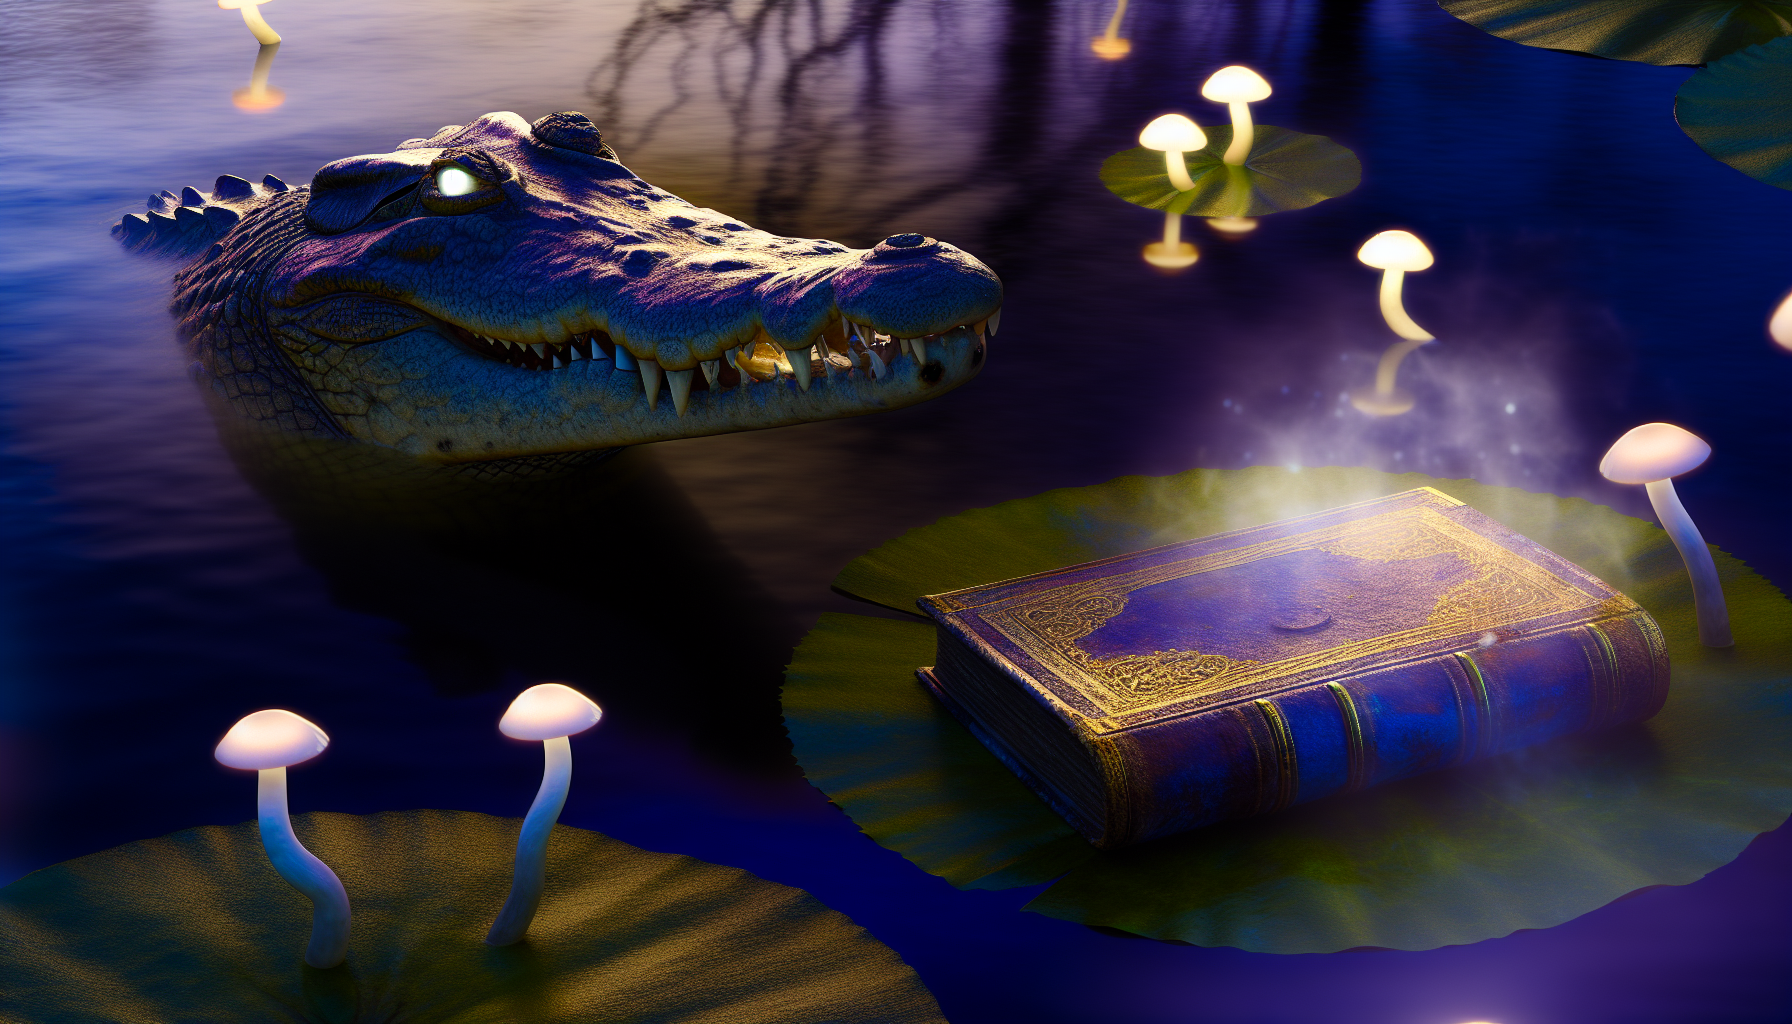 You are currently viewing Understanding Crocodiles in Dreams Biblically